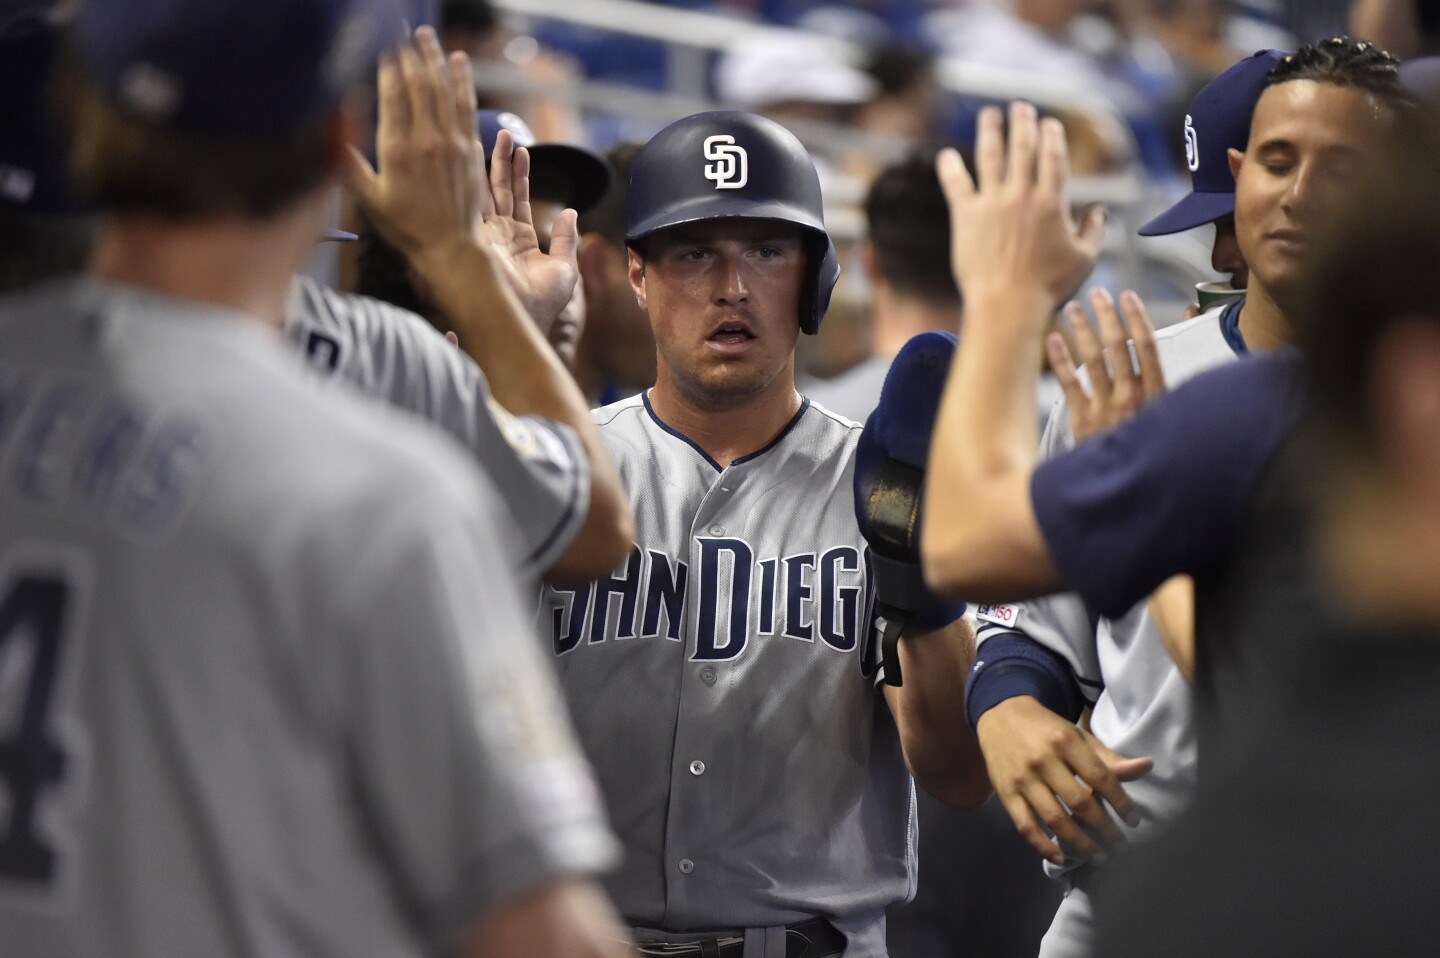 MIAMI, FL - JULY 18: Hunter Renfroe #10 of the San Diego Padres is congratulated by teammates after scoring in the first inning against the Miami Marlins at Marlins Park on July 18, 2019 in Miami, Florida. (Photo by Eric Espada/Getty Images) ** OUTS - ELSENT, FPG, CM - OUTS * NM, PH, VA if sourced by CT, LA or MoD **